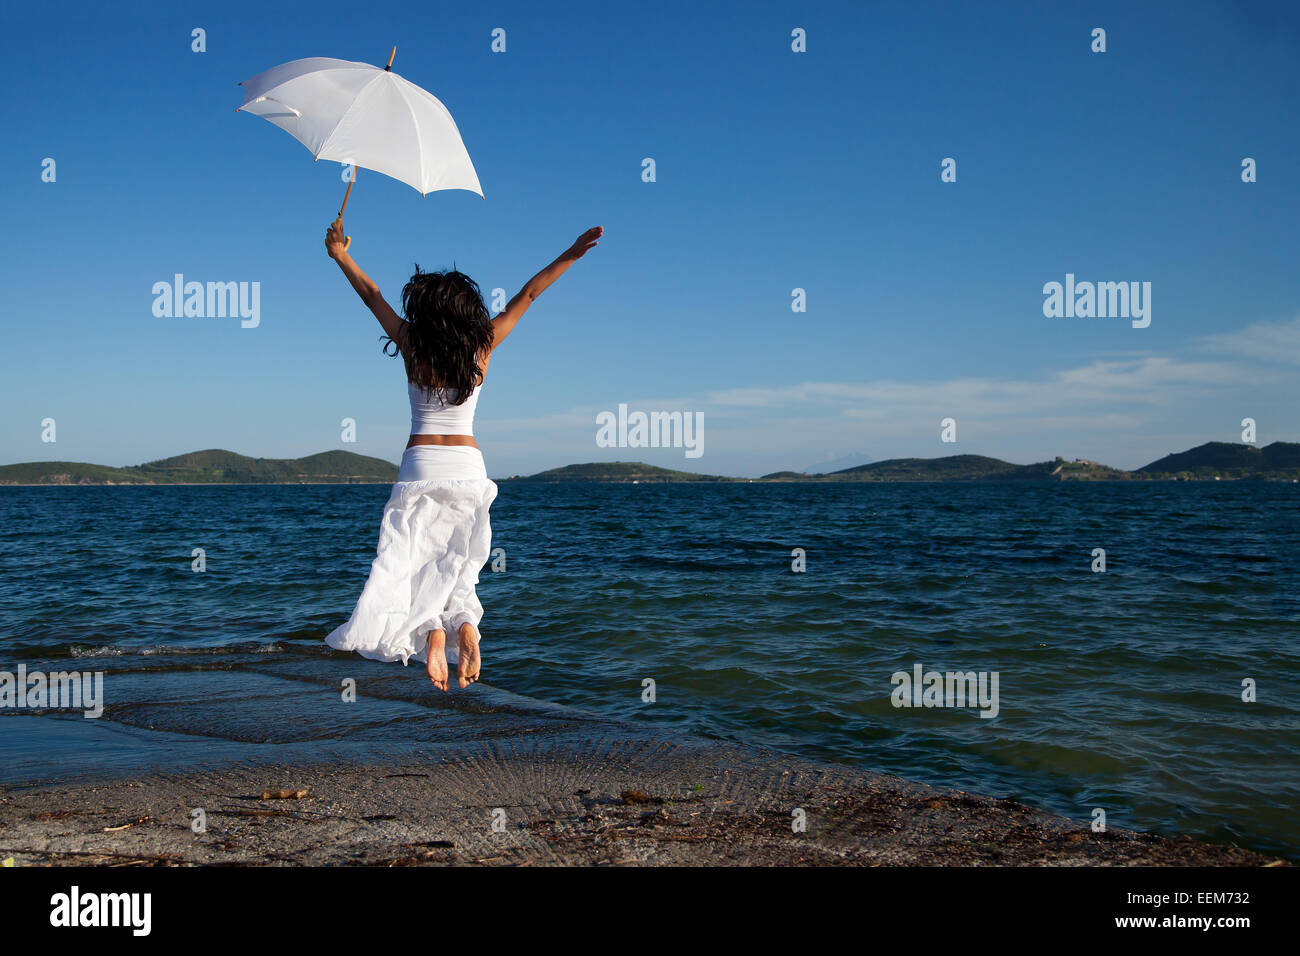 Young Woman Silhouette Jumping On The Beach Stock Image 